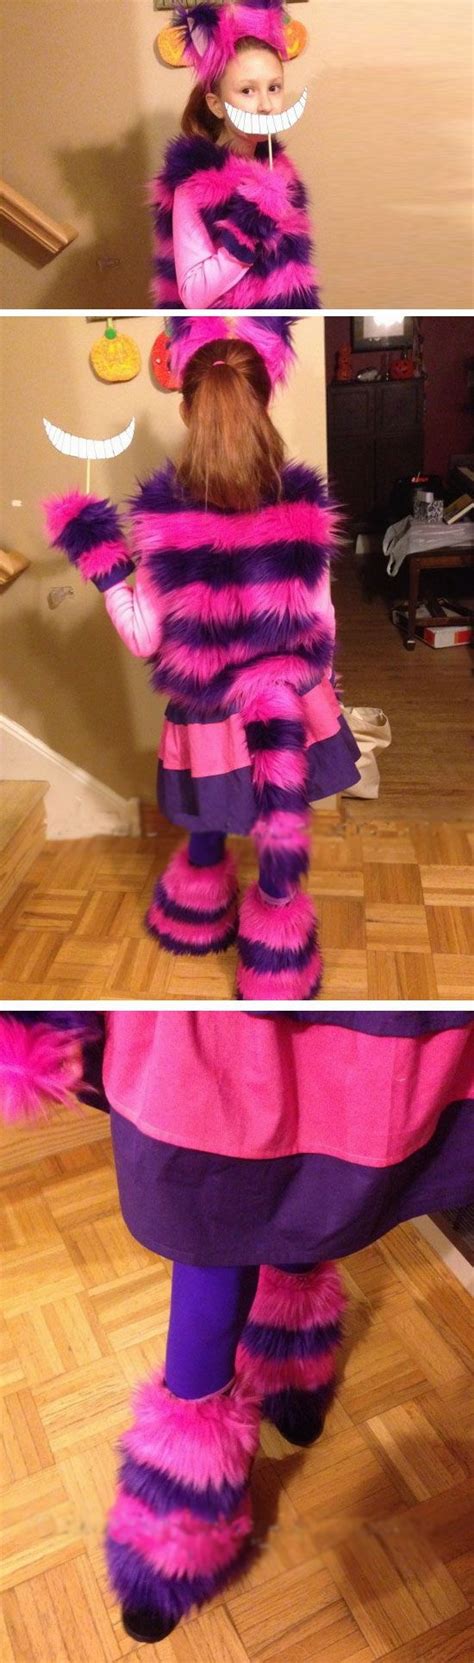 Guppy is the cheshire cat from alice in wonderland! Cheshire Cat | 25+ DIY Halloween Costumes for Kids to Make … | Cat costume diy, Diy halloween ...